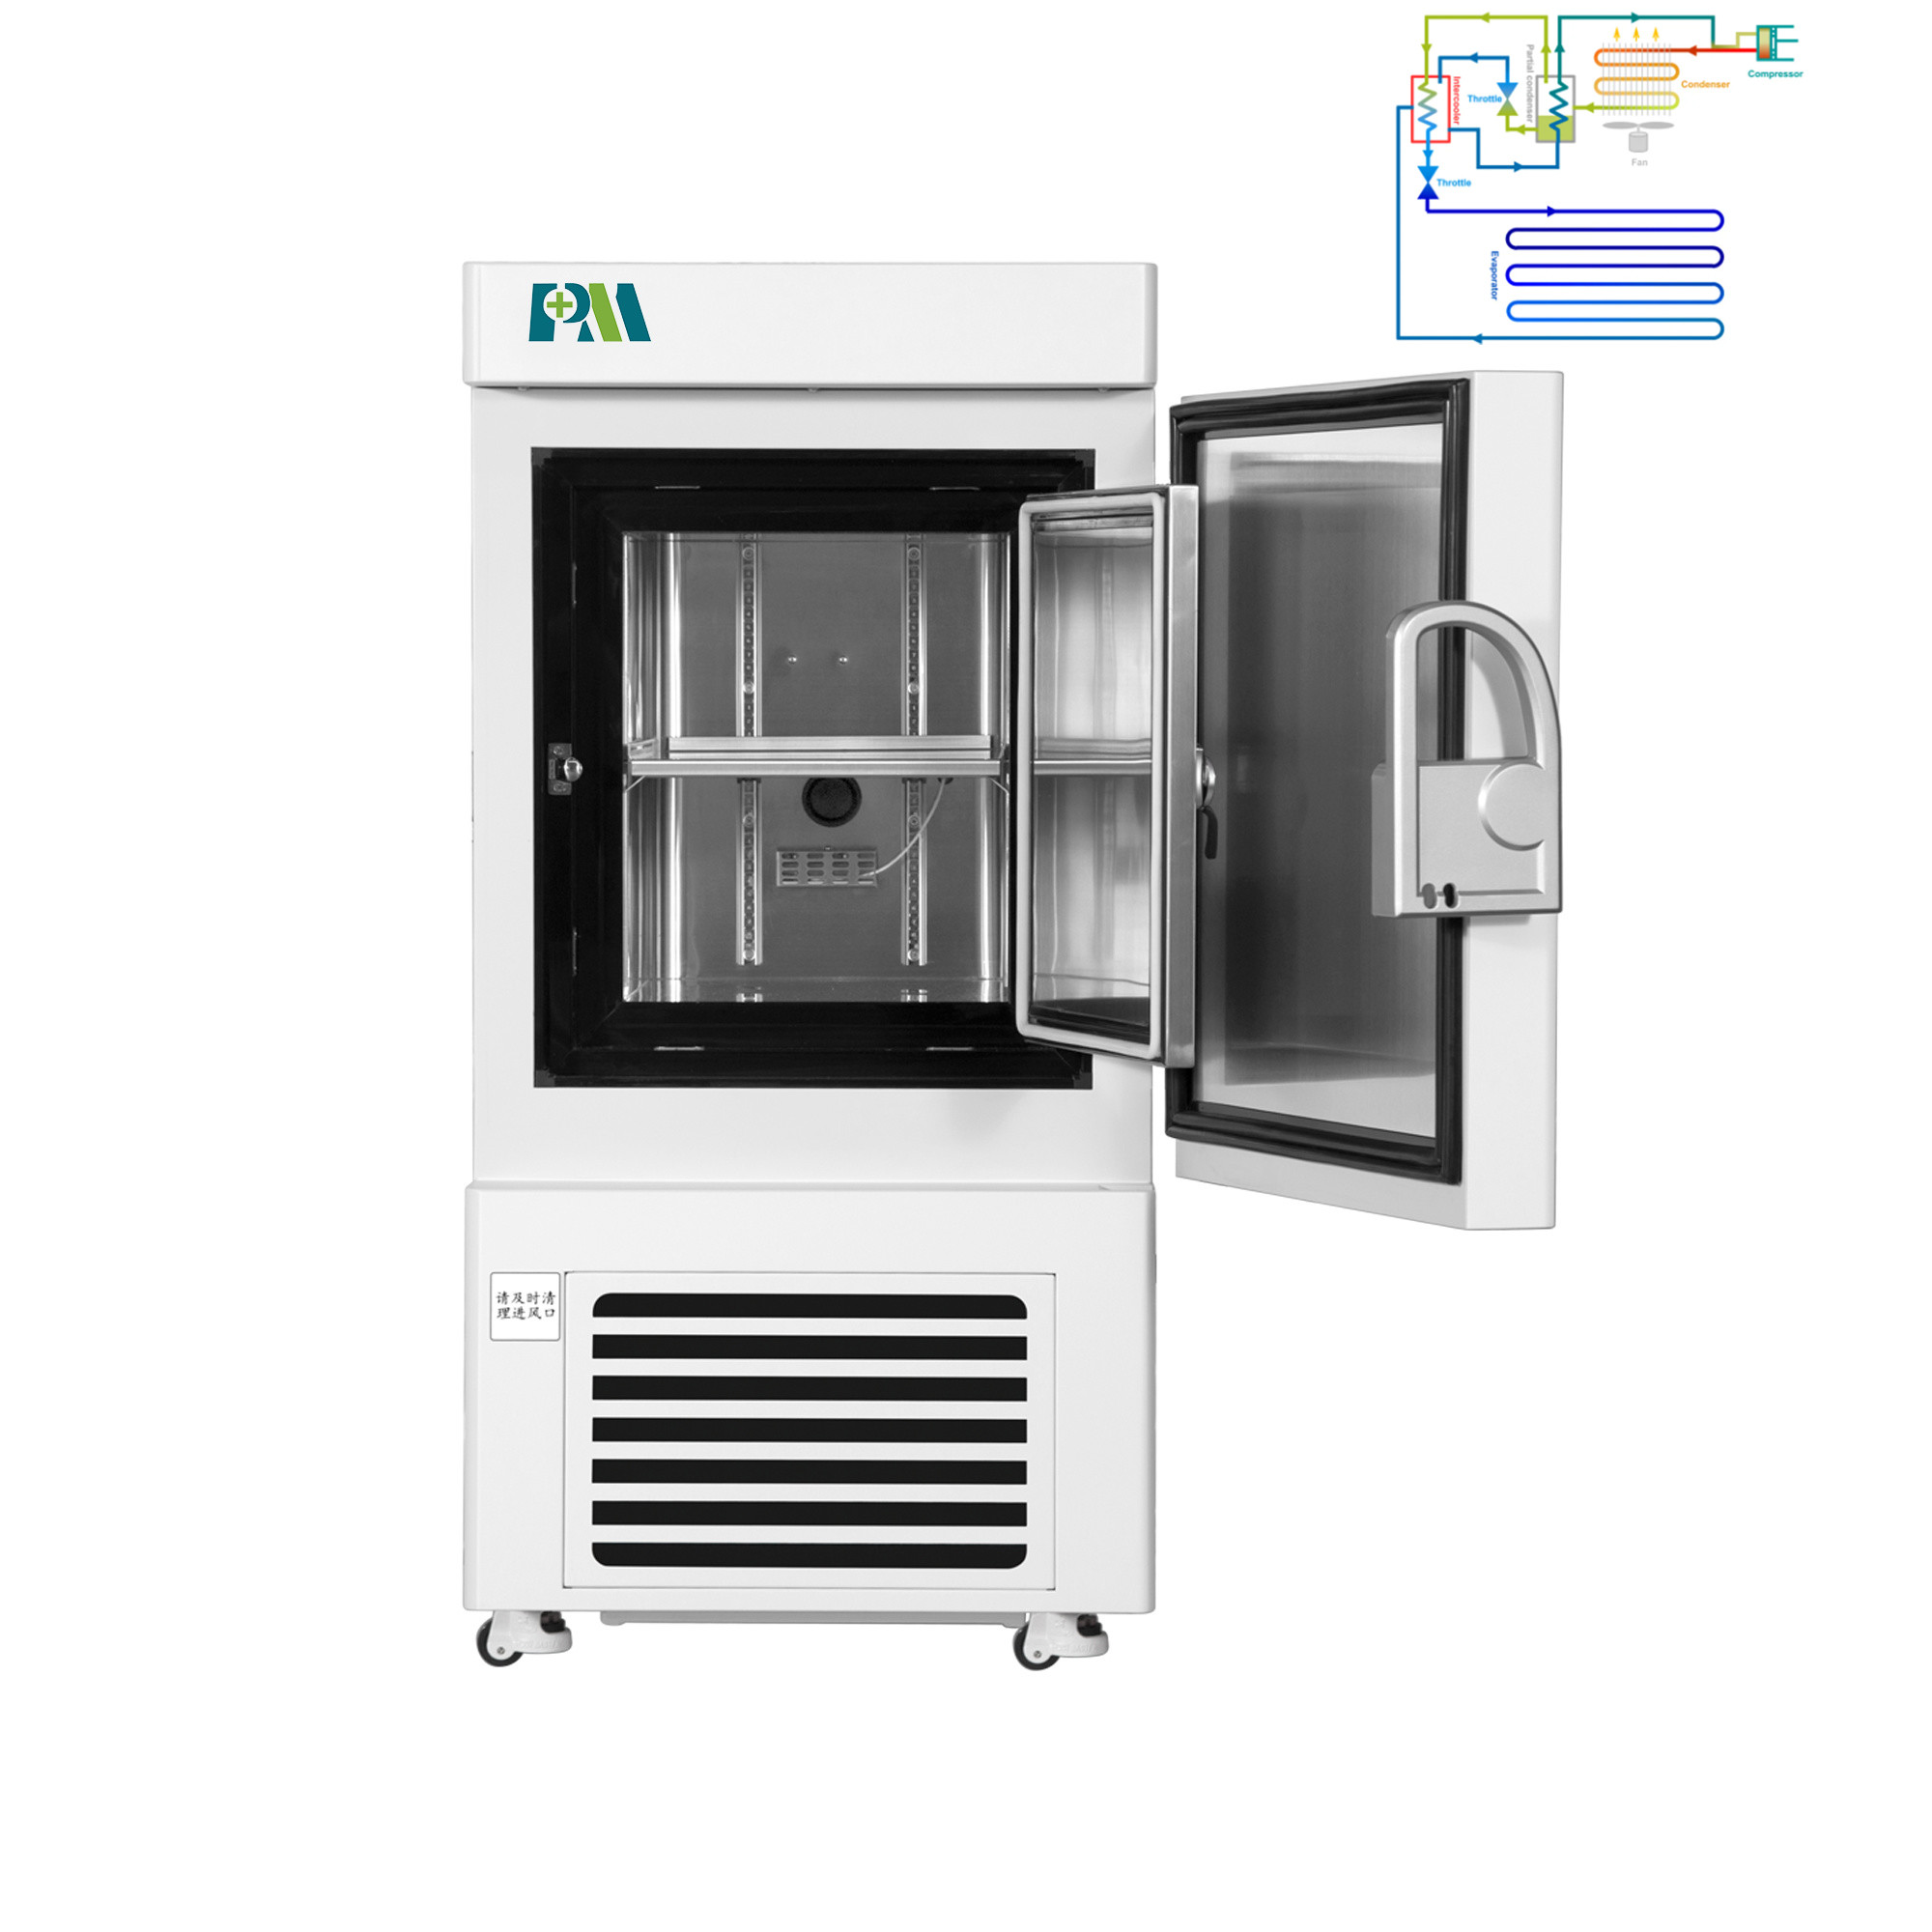 Auto-Cascade System  -86 degree ultra low temperature Refrigeration for vacainne and laboratory